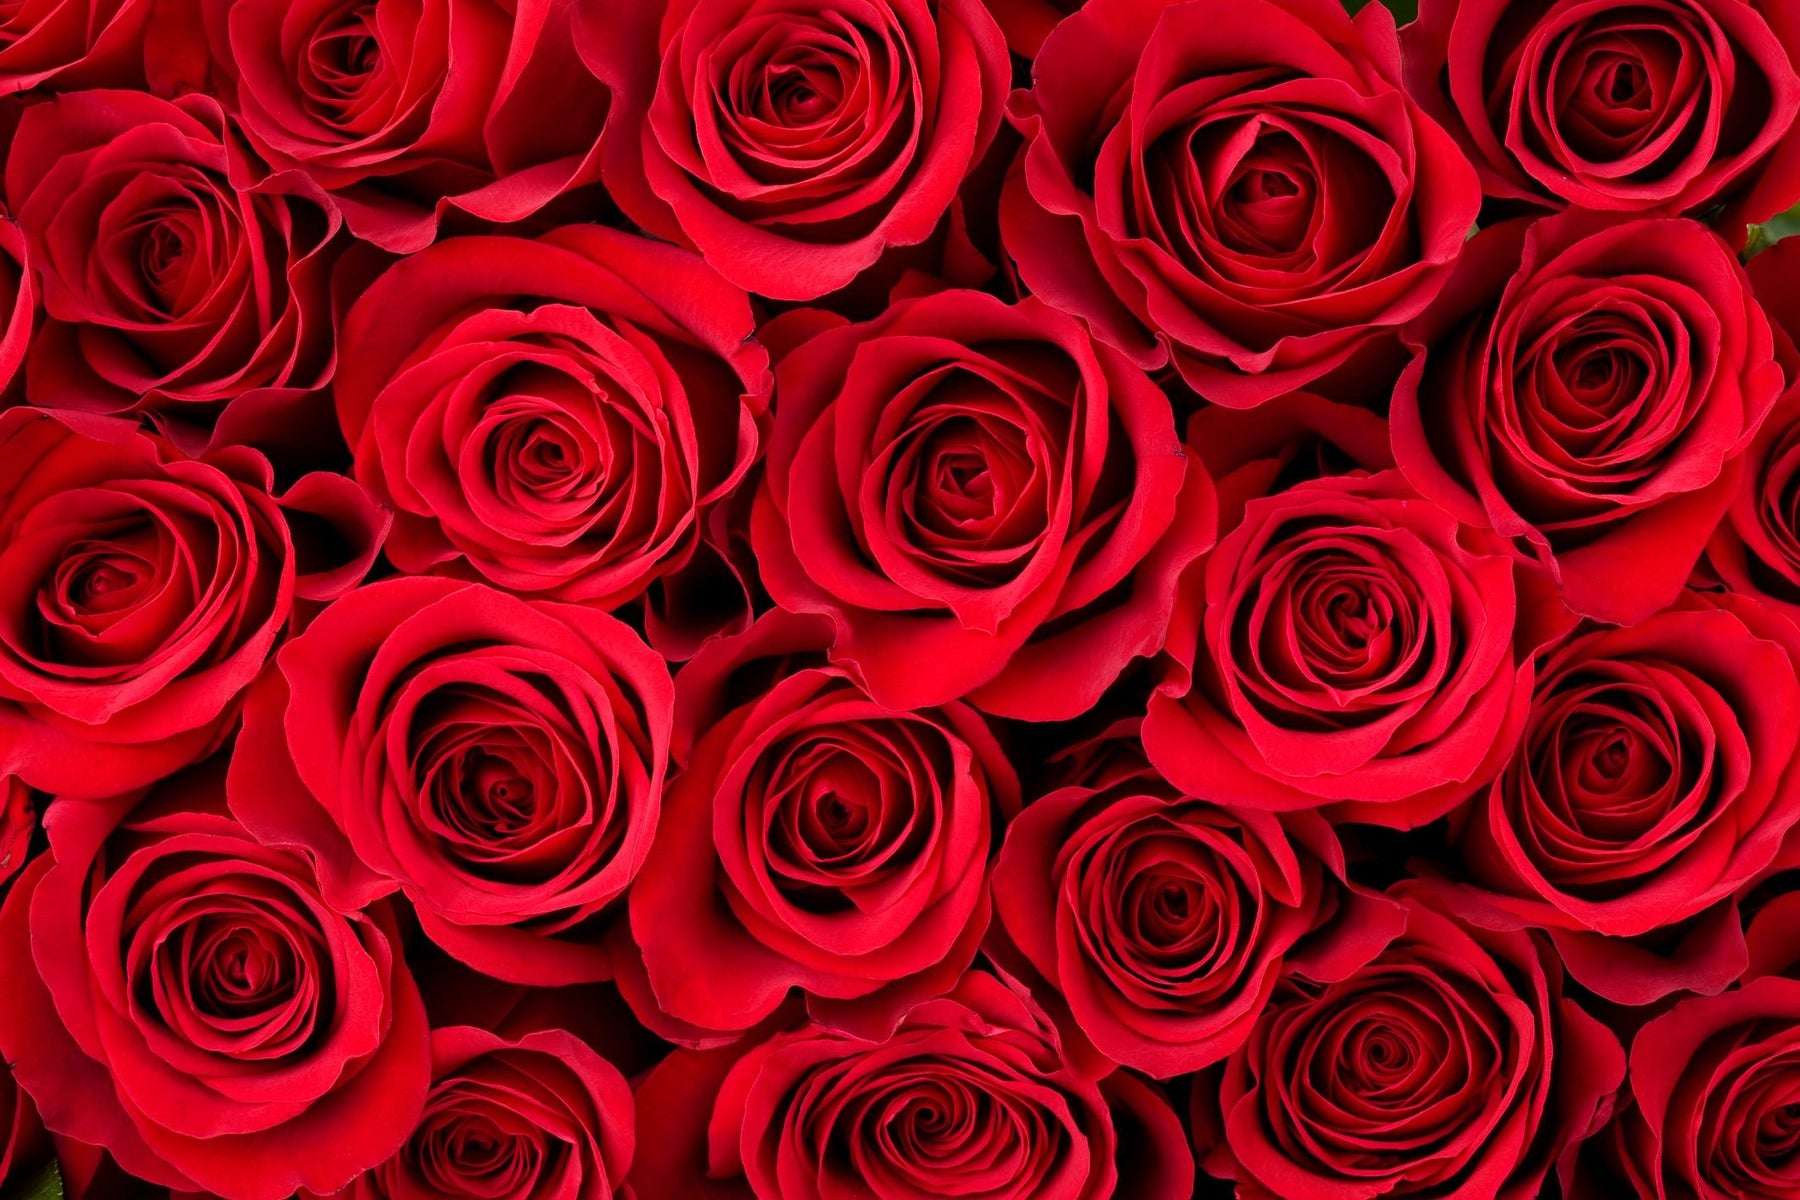 Meaning Behind Red Roses on Valentine’s Day